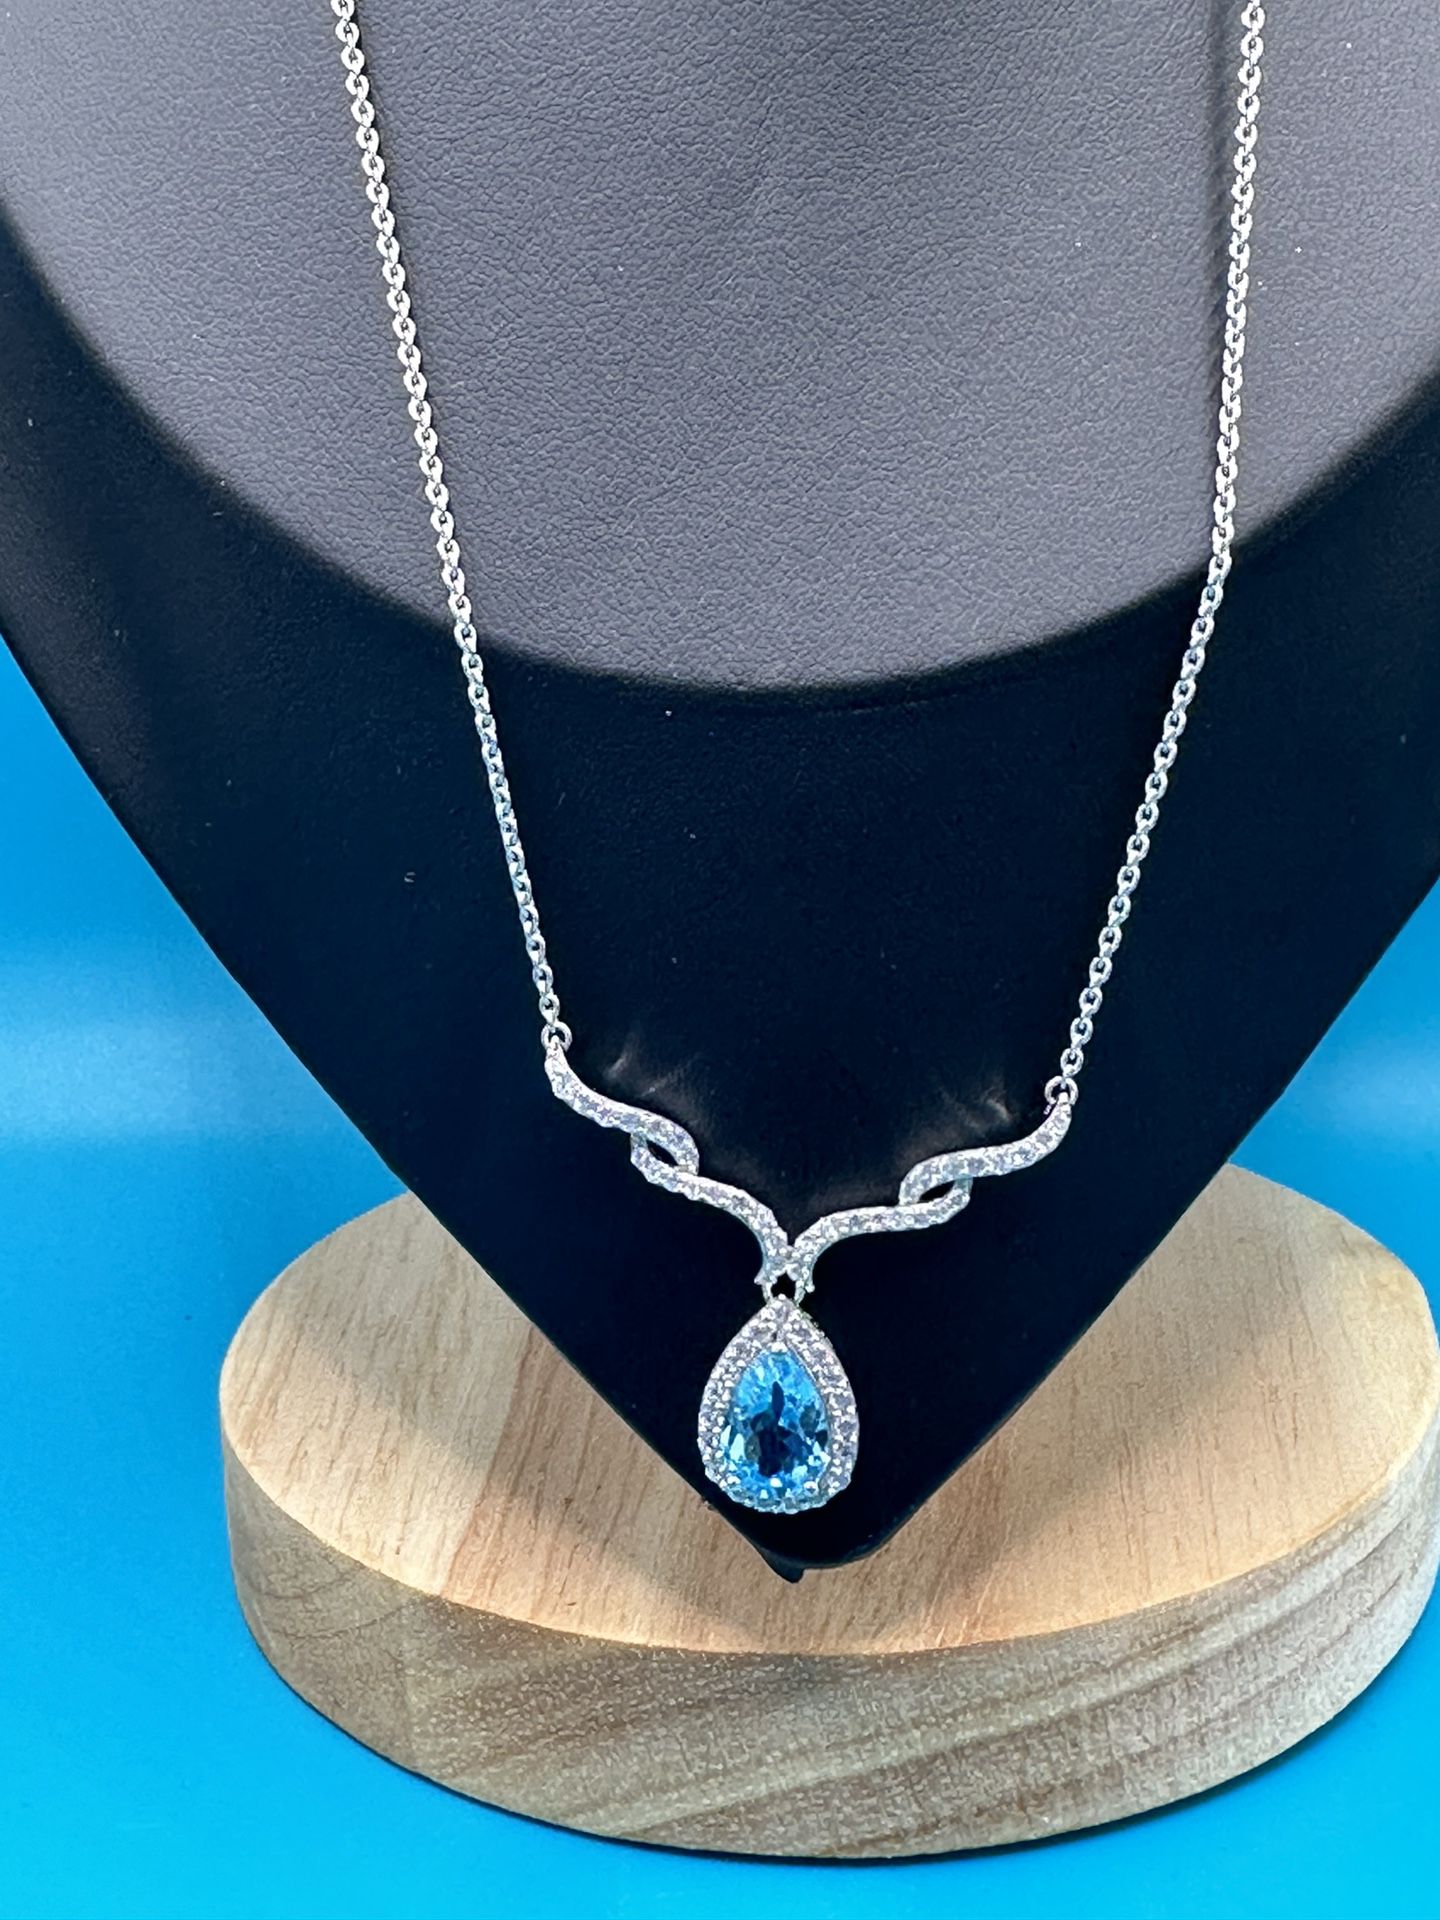 New Pear Cut 4.24 Carat Blue Topaz With White Sapphire Necklace 18” Long 5.65 Grams Stunning!